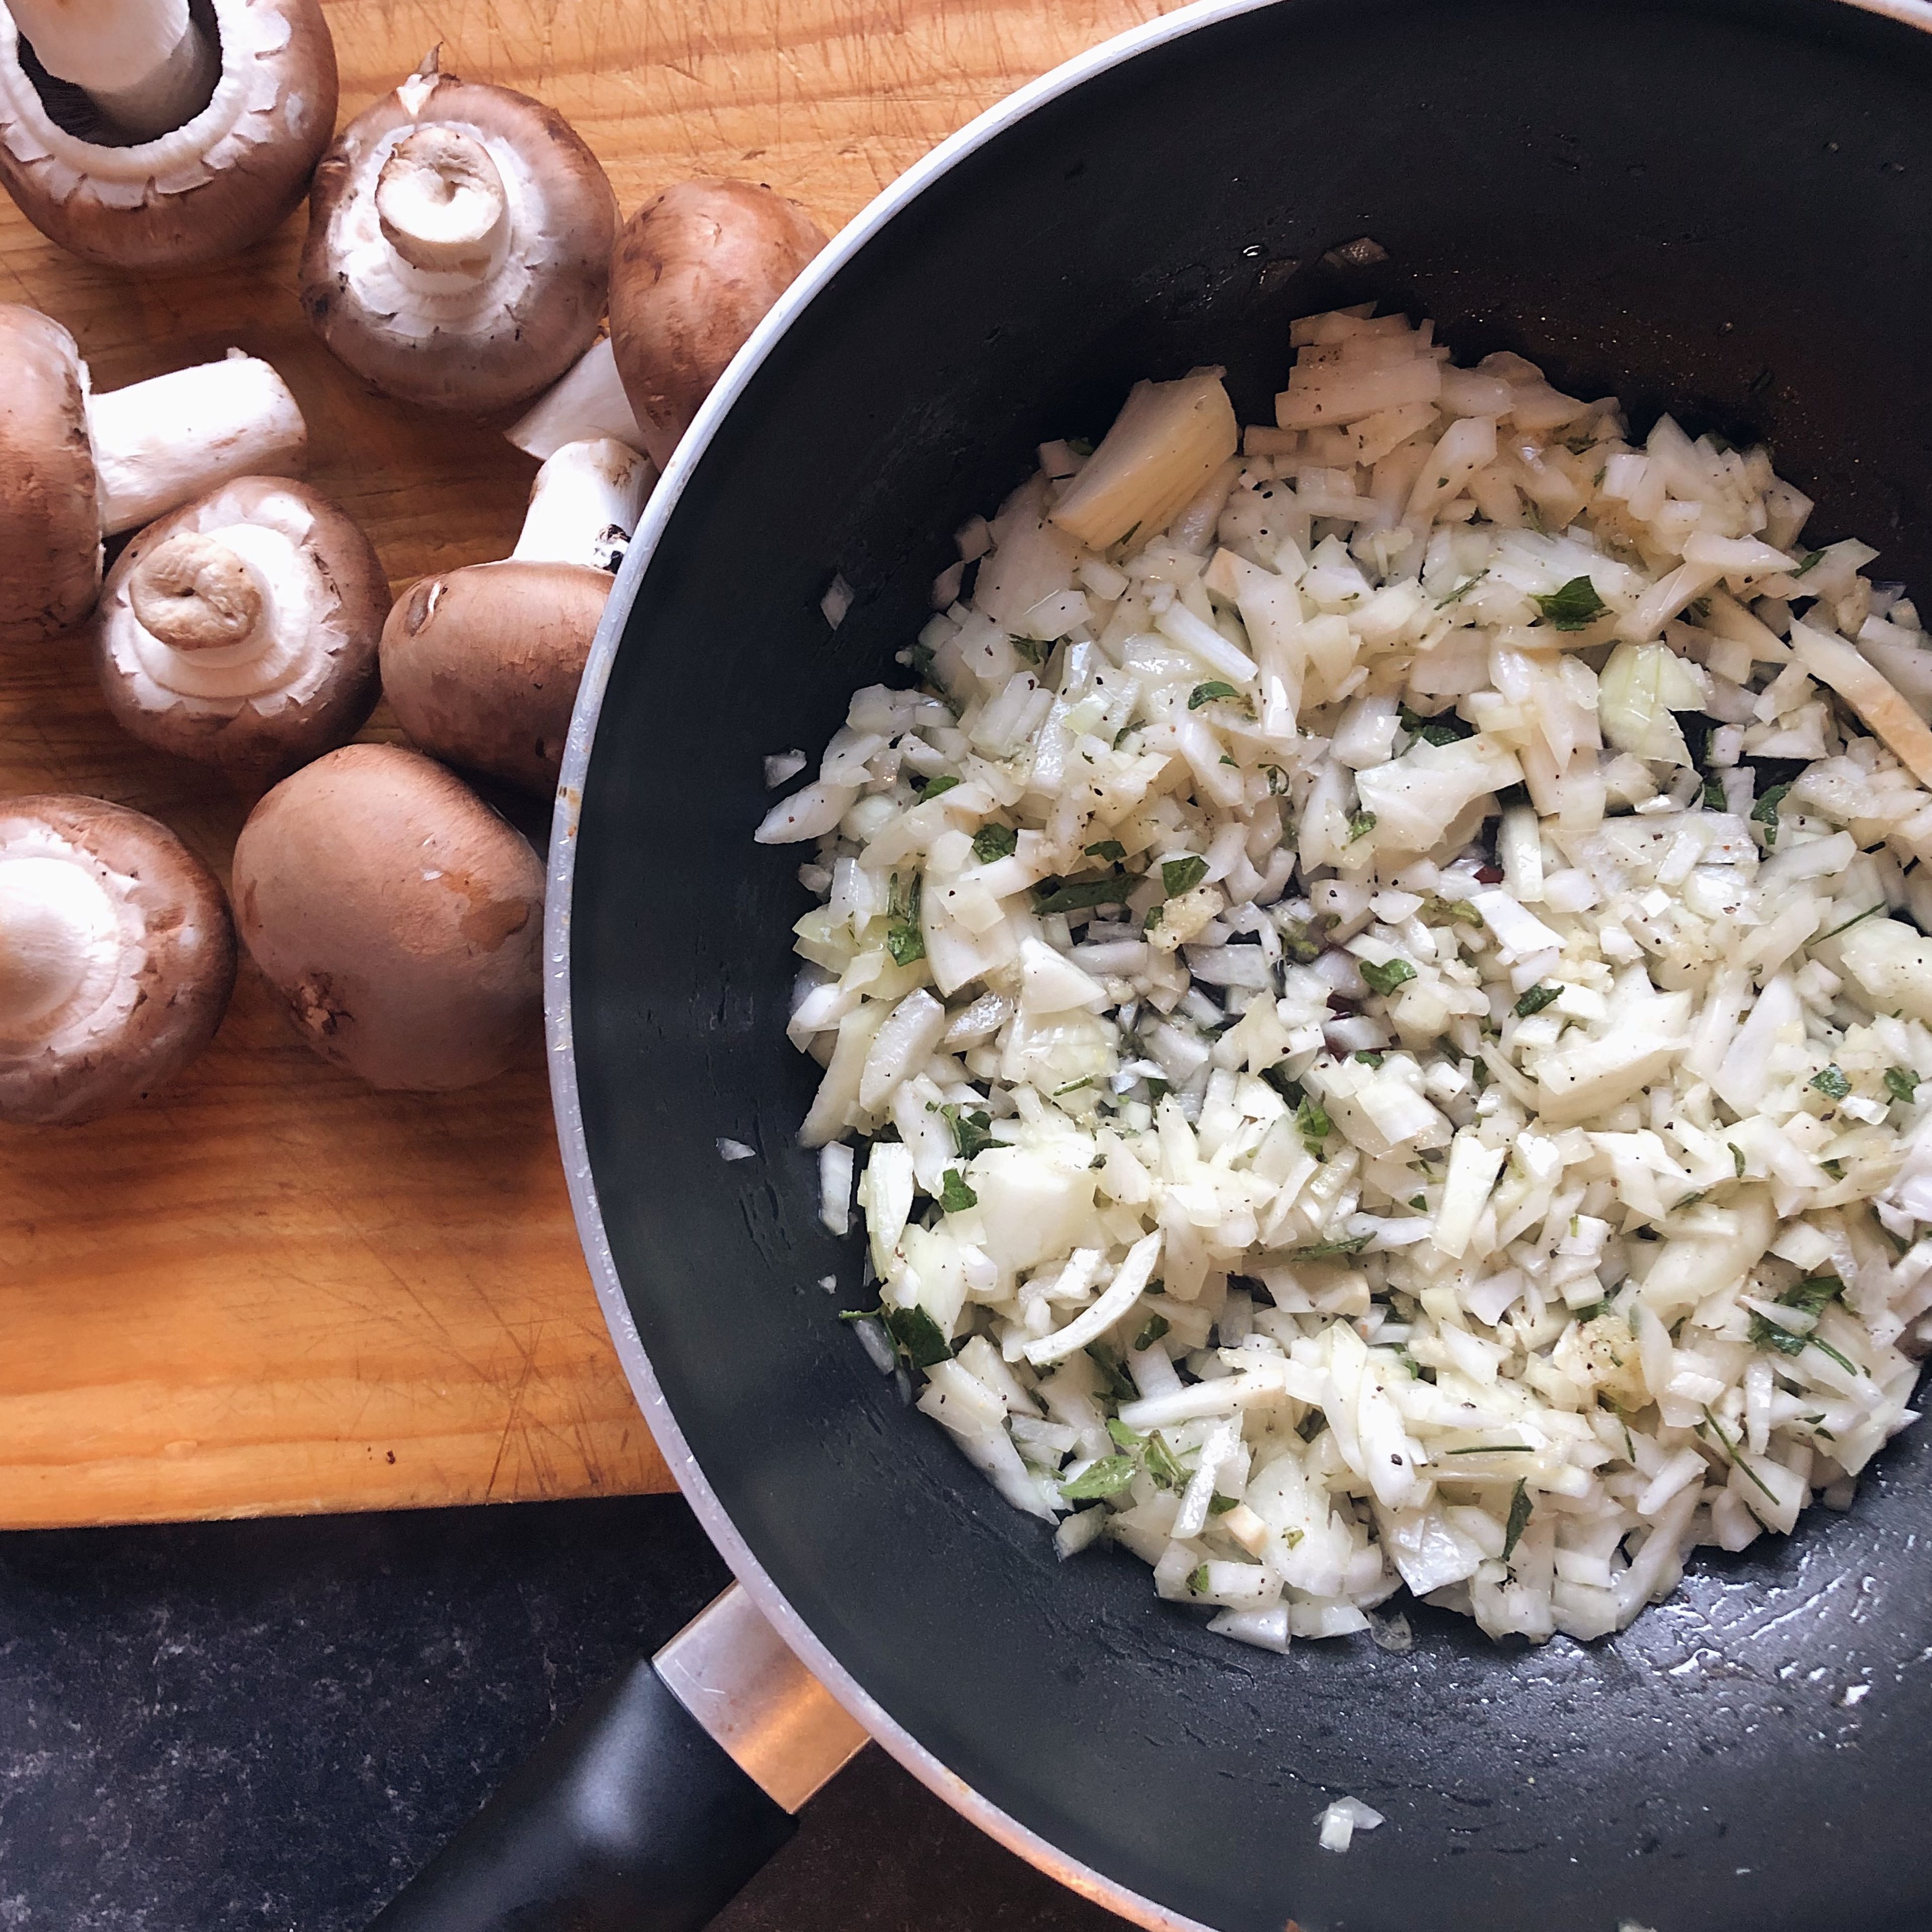 Dice onion, press garlic, finely chop fresh herbs and add salt and pepper to the pan. Pour on a good amount of olive oil and sweat on a medium heat for 10 minutes.